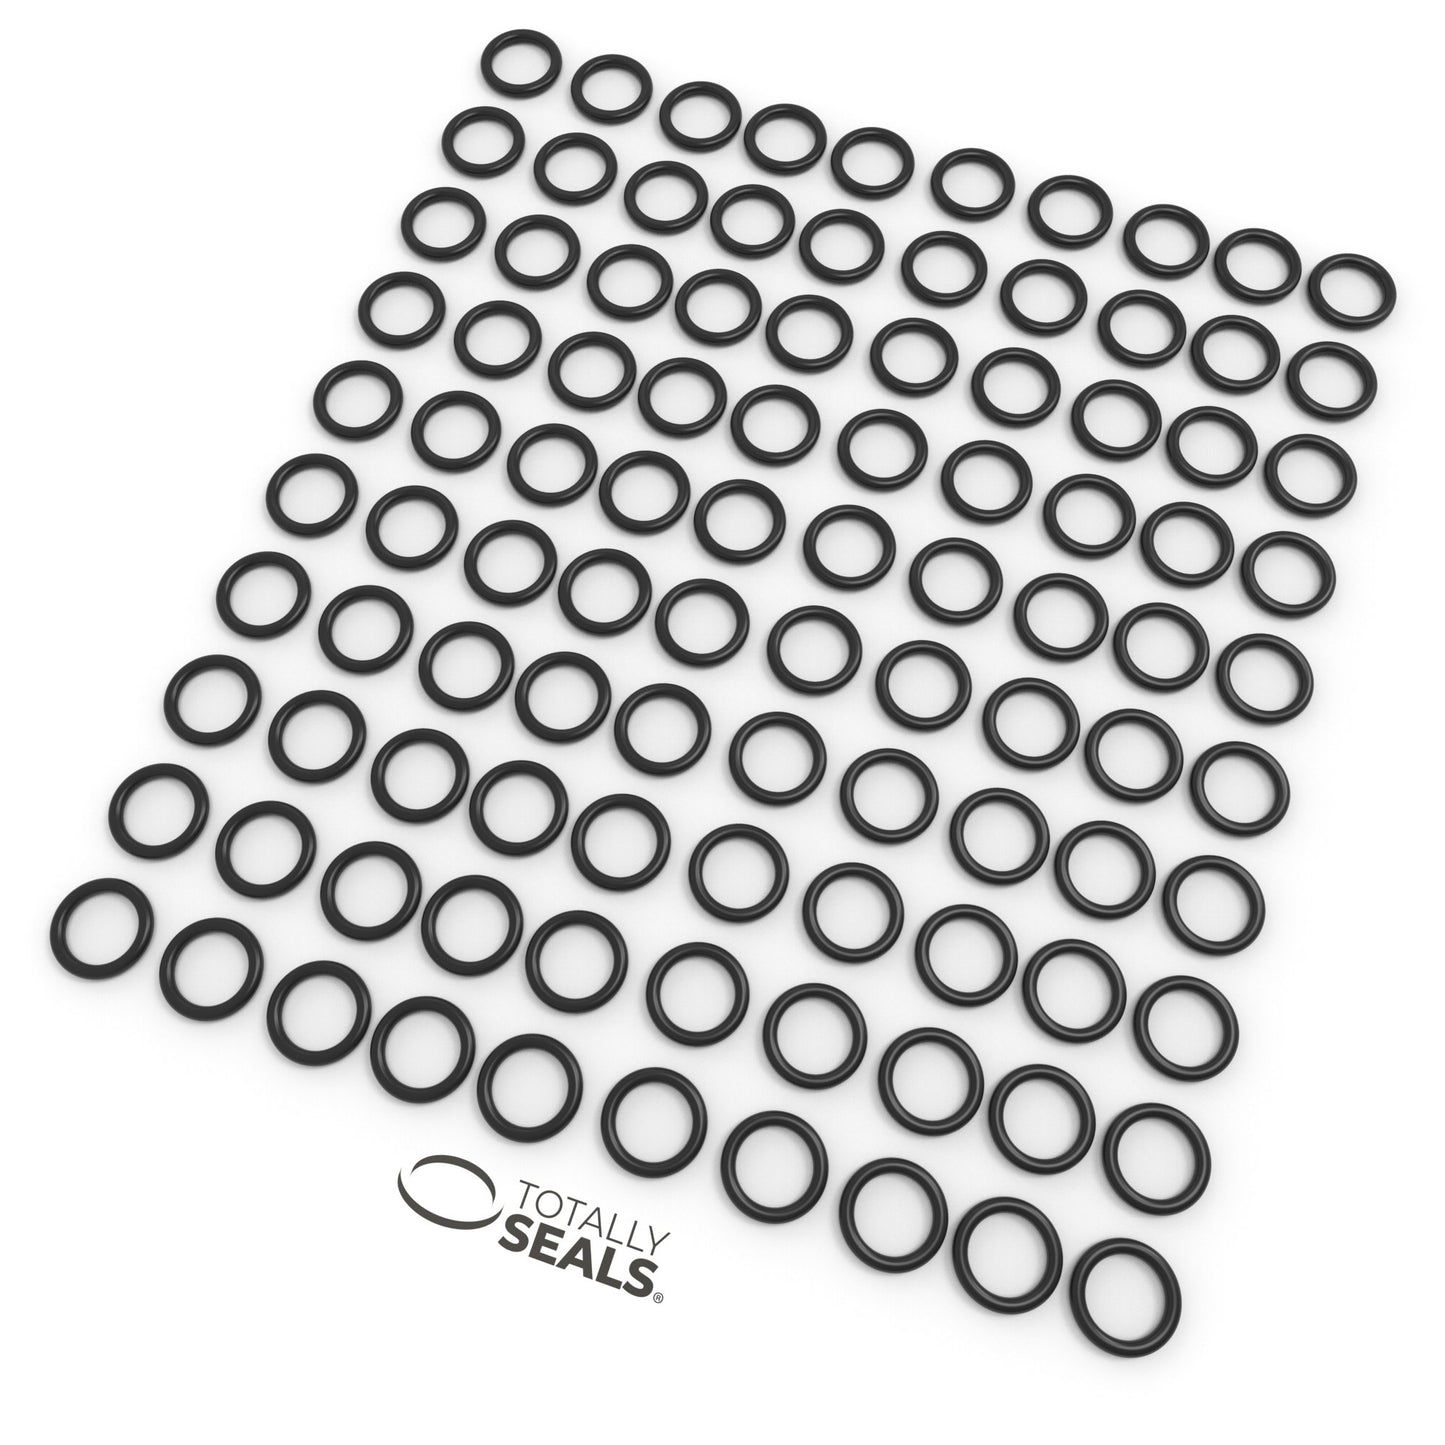 3/8" x 3/32" (BS110) Imperial Nitrile O-Rings - Totally Seals®